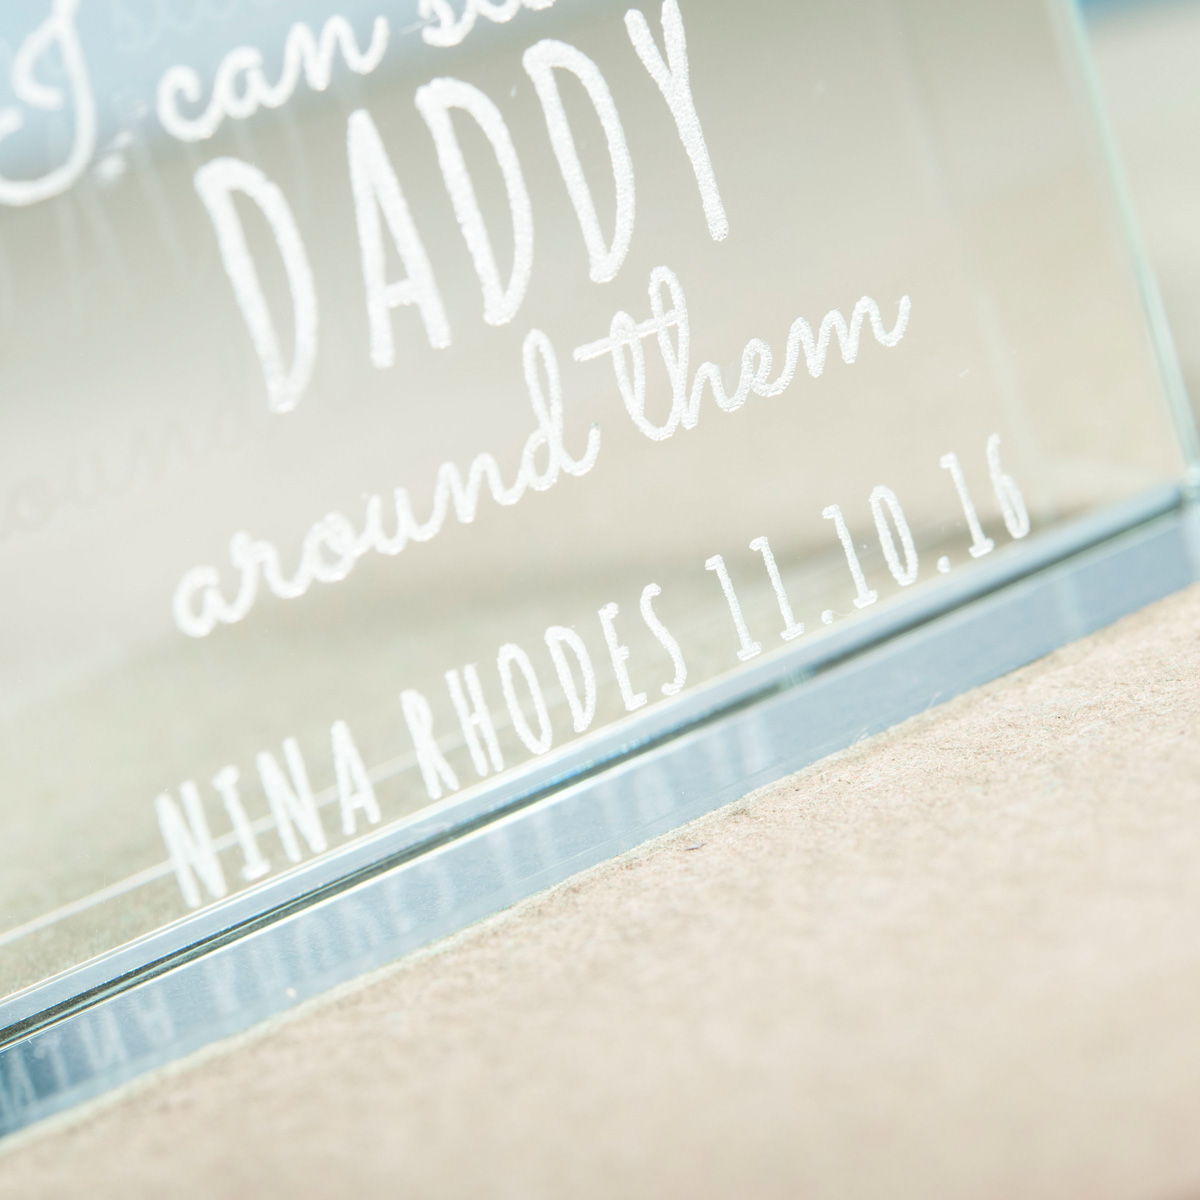 Personalised Glass Token - Wrap Daddy Around My Fingers